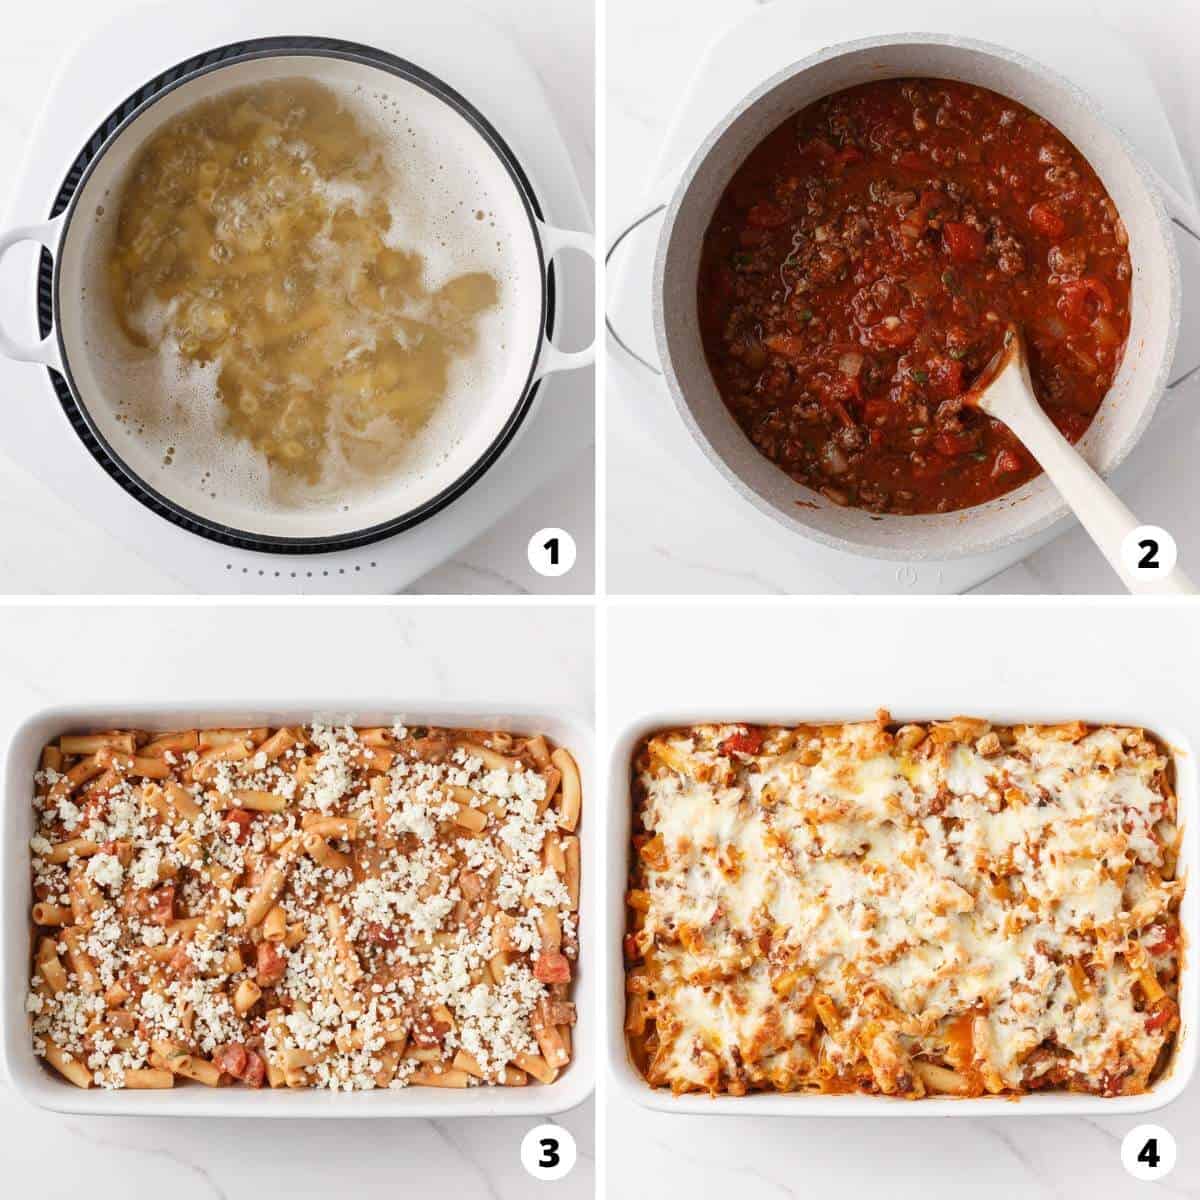 Showing how to make baked ziti in a 4 step collage.